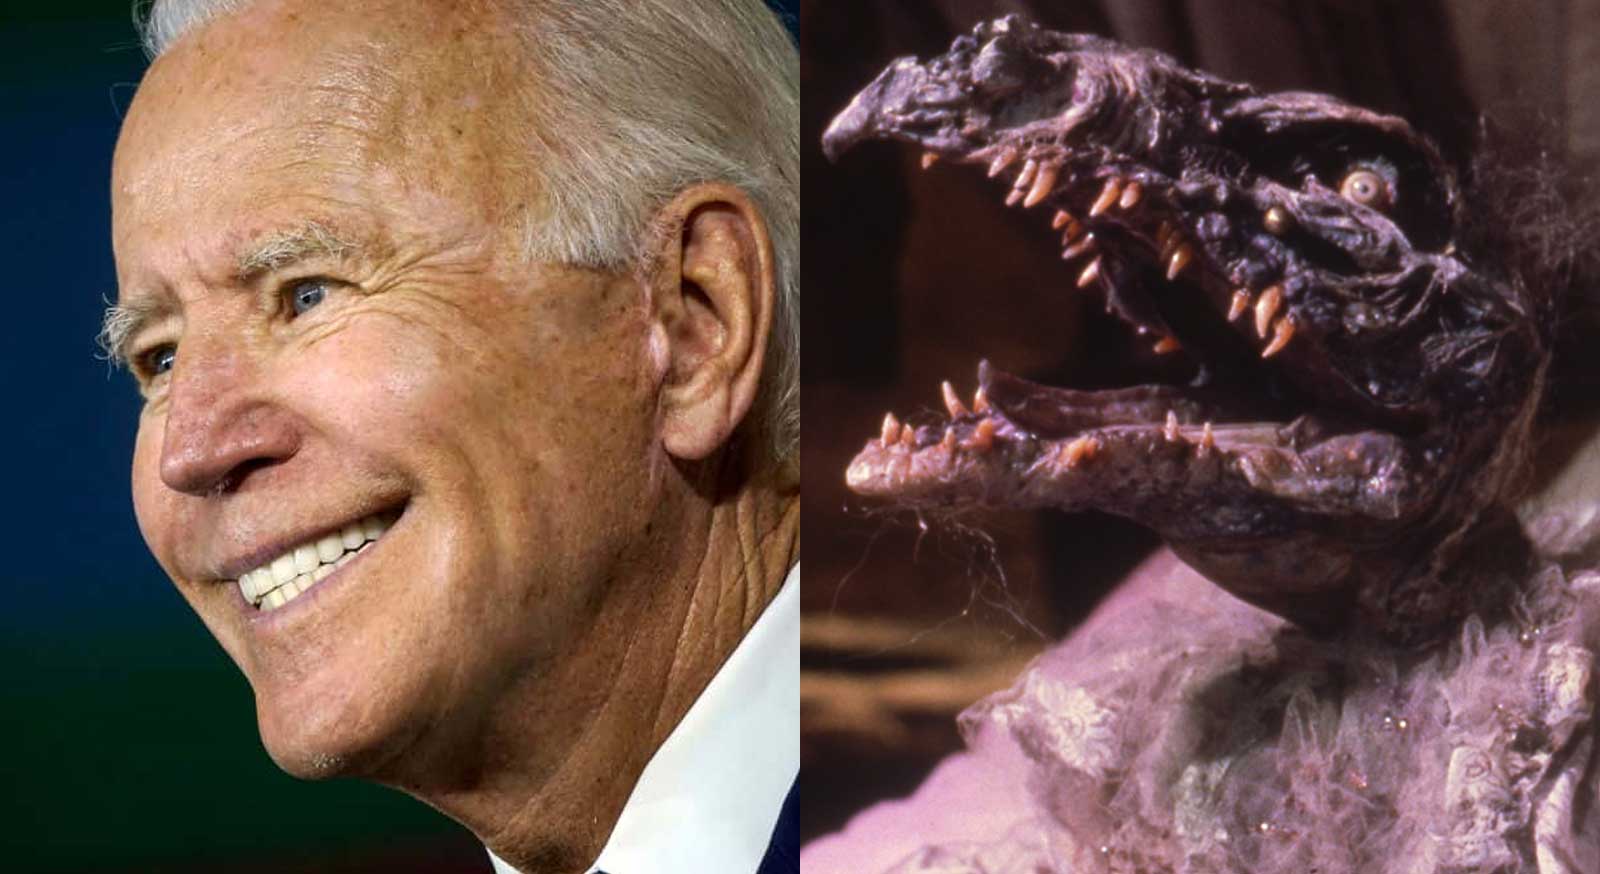 The frail and ending reign of the emperor is the future of Joe Biden.